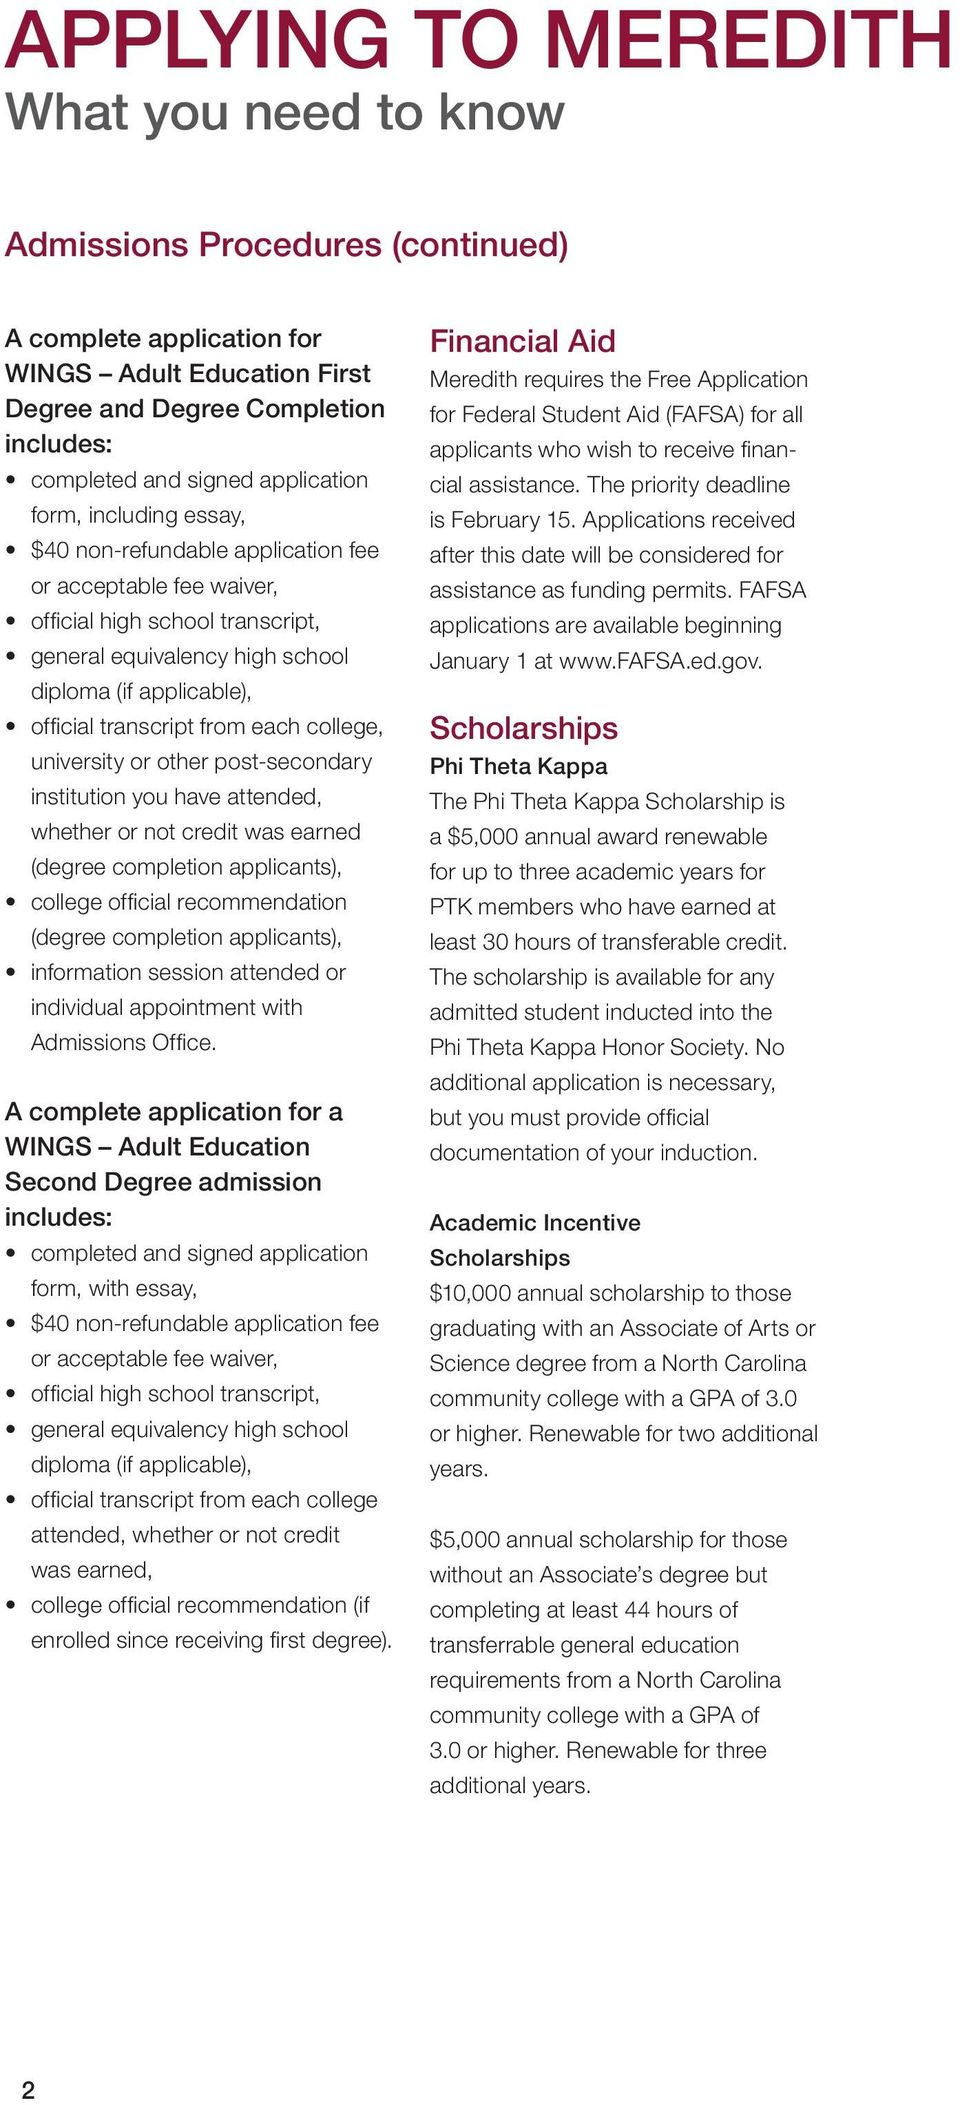 transcript from each college, university or other post-secondary institution you have attended, whether or not credit was earned (degree completion applicants), college official recommendation